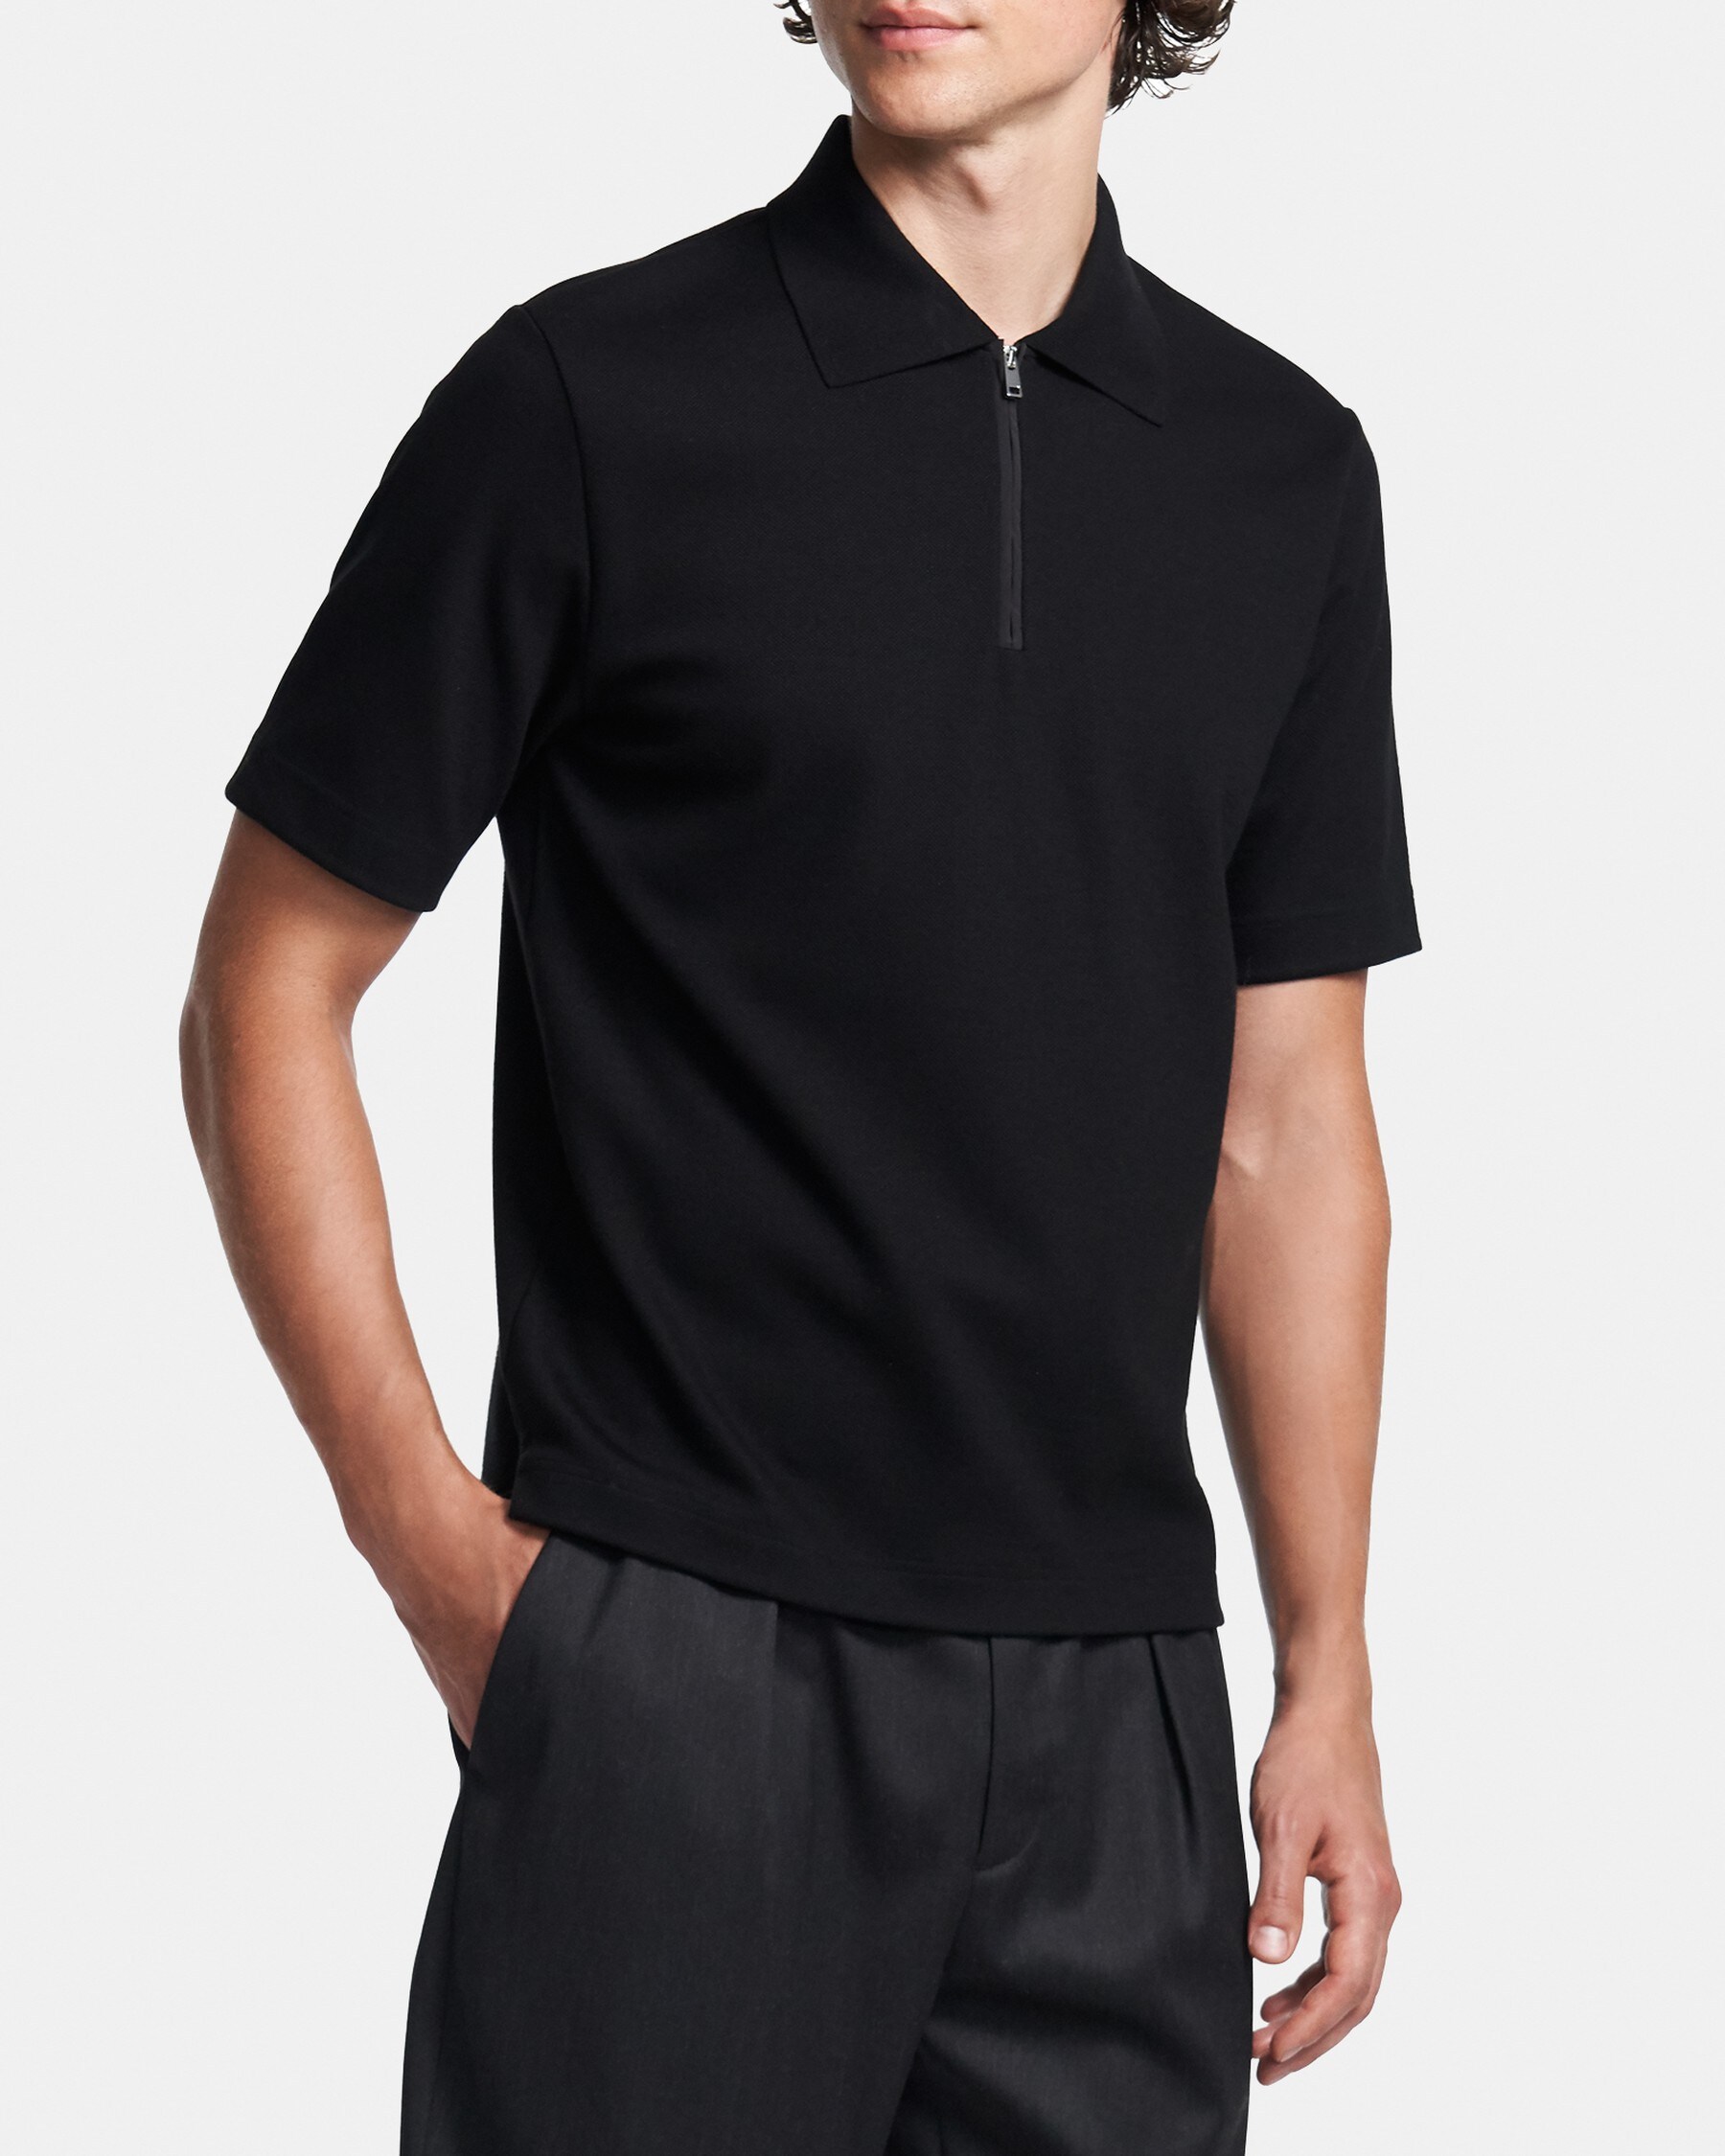 CARSONE POLO | Theory Outlet